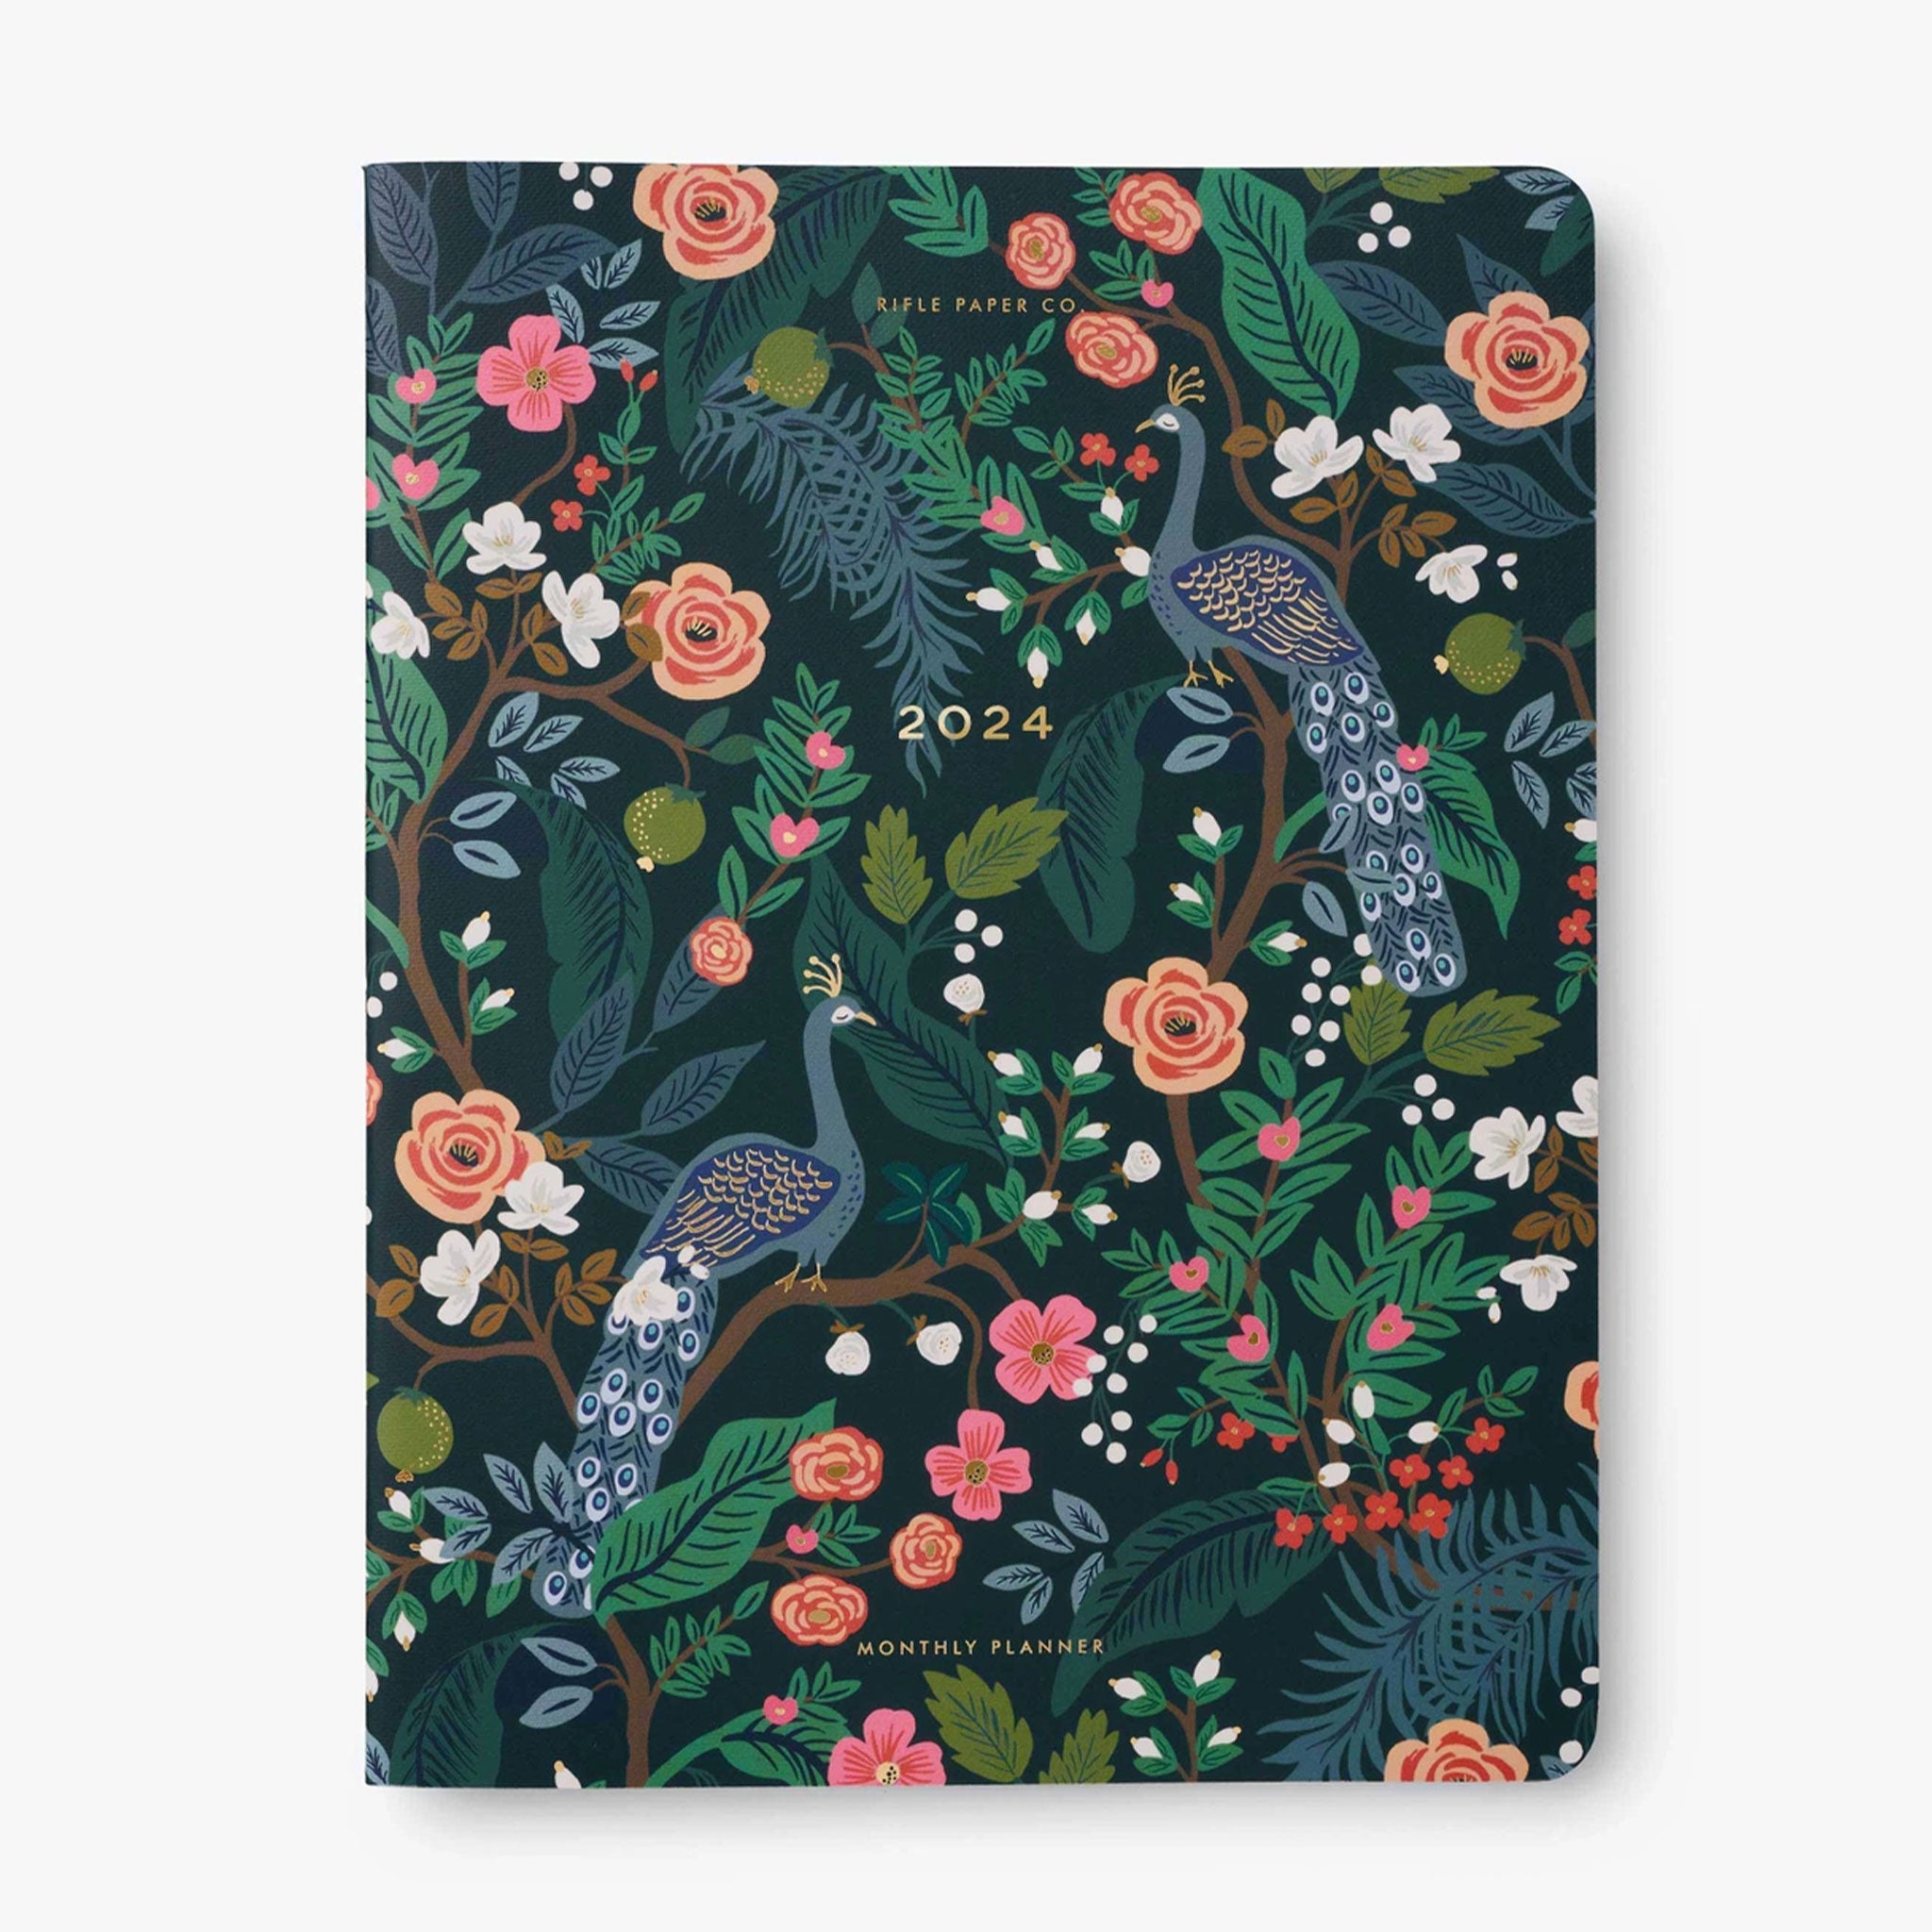 On a white background is a planner with a front cover featuring a peacock and flower design along with "2024" in small gold foiled text in the center. 